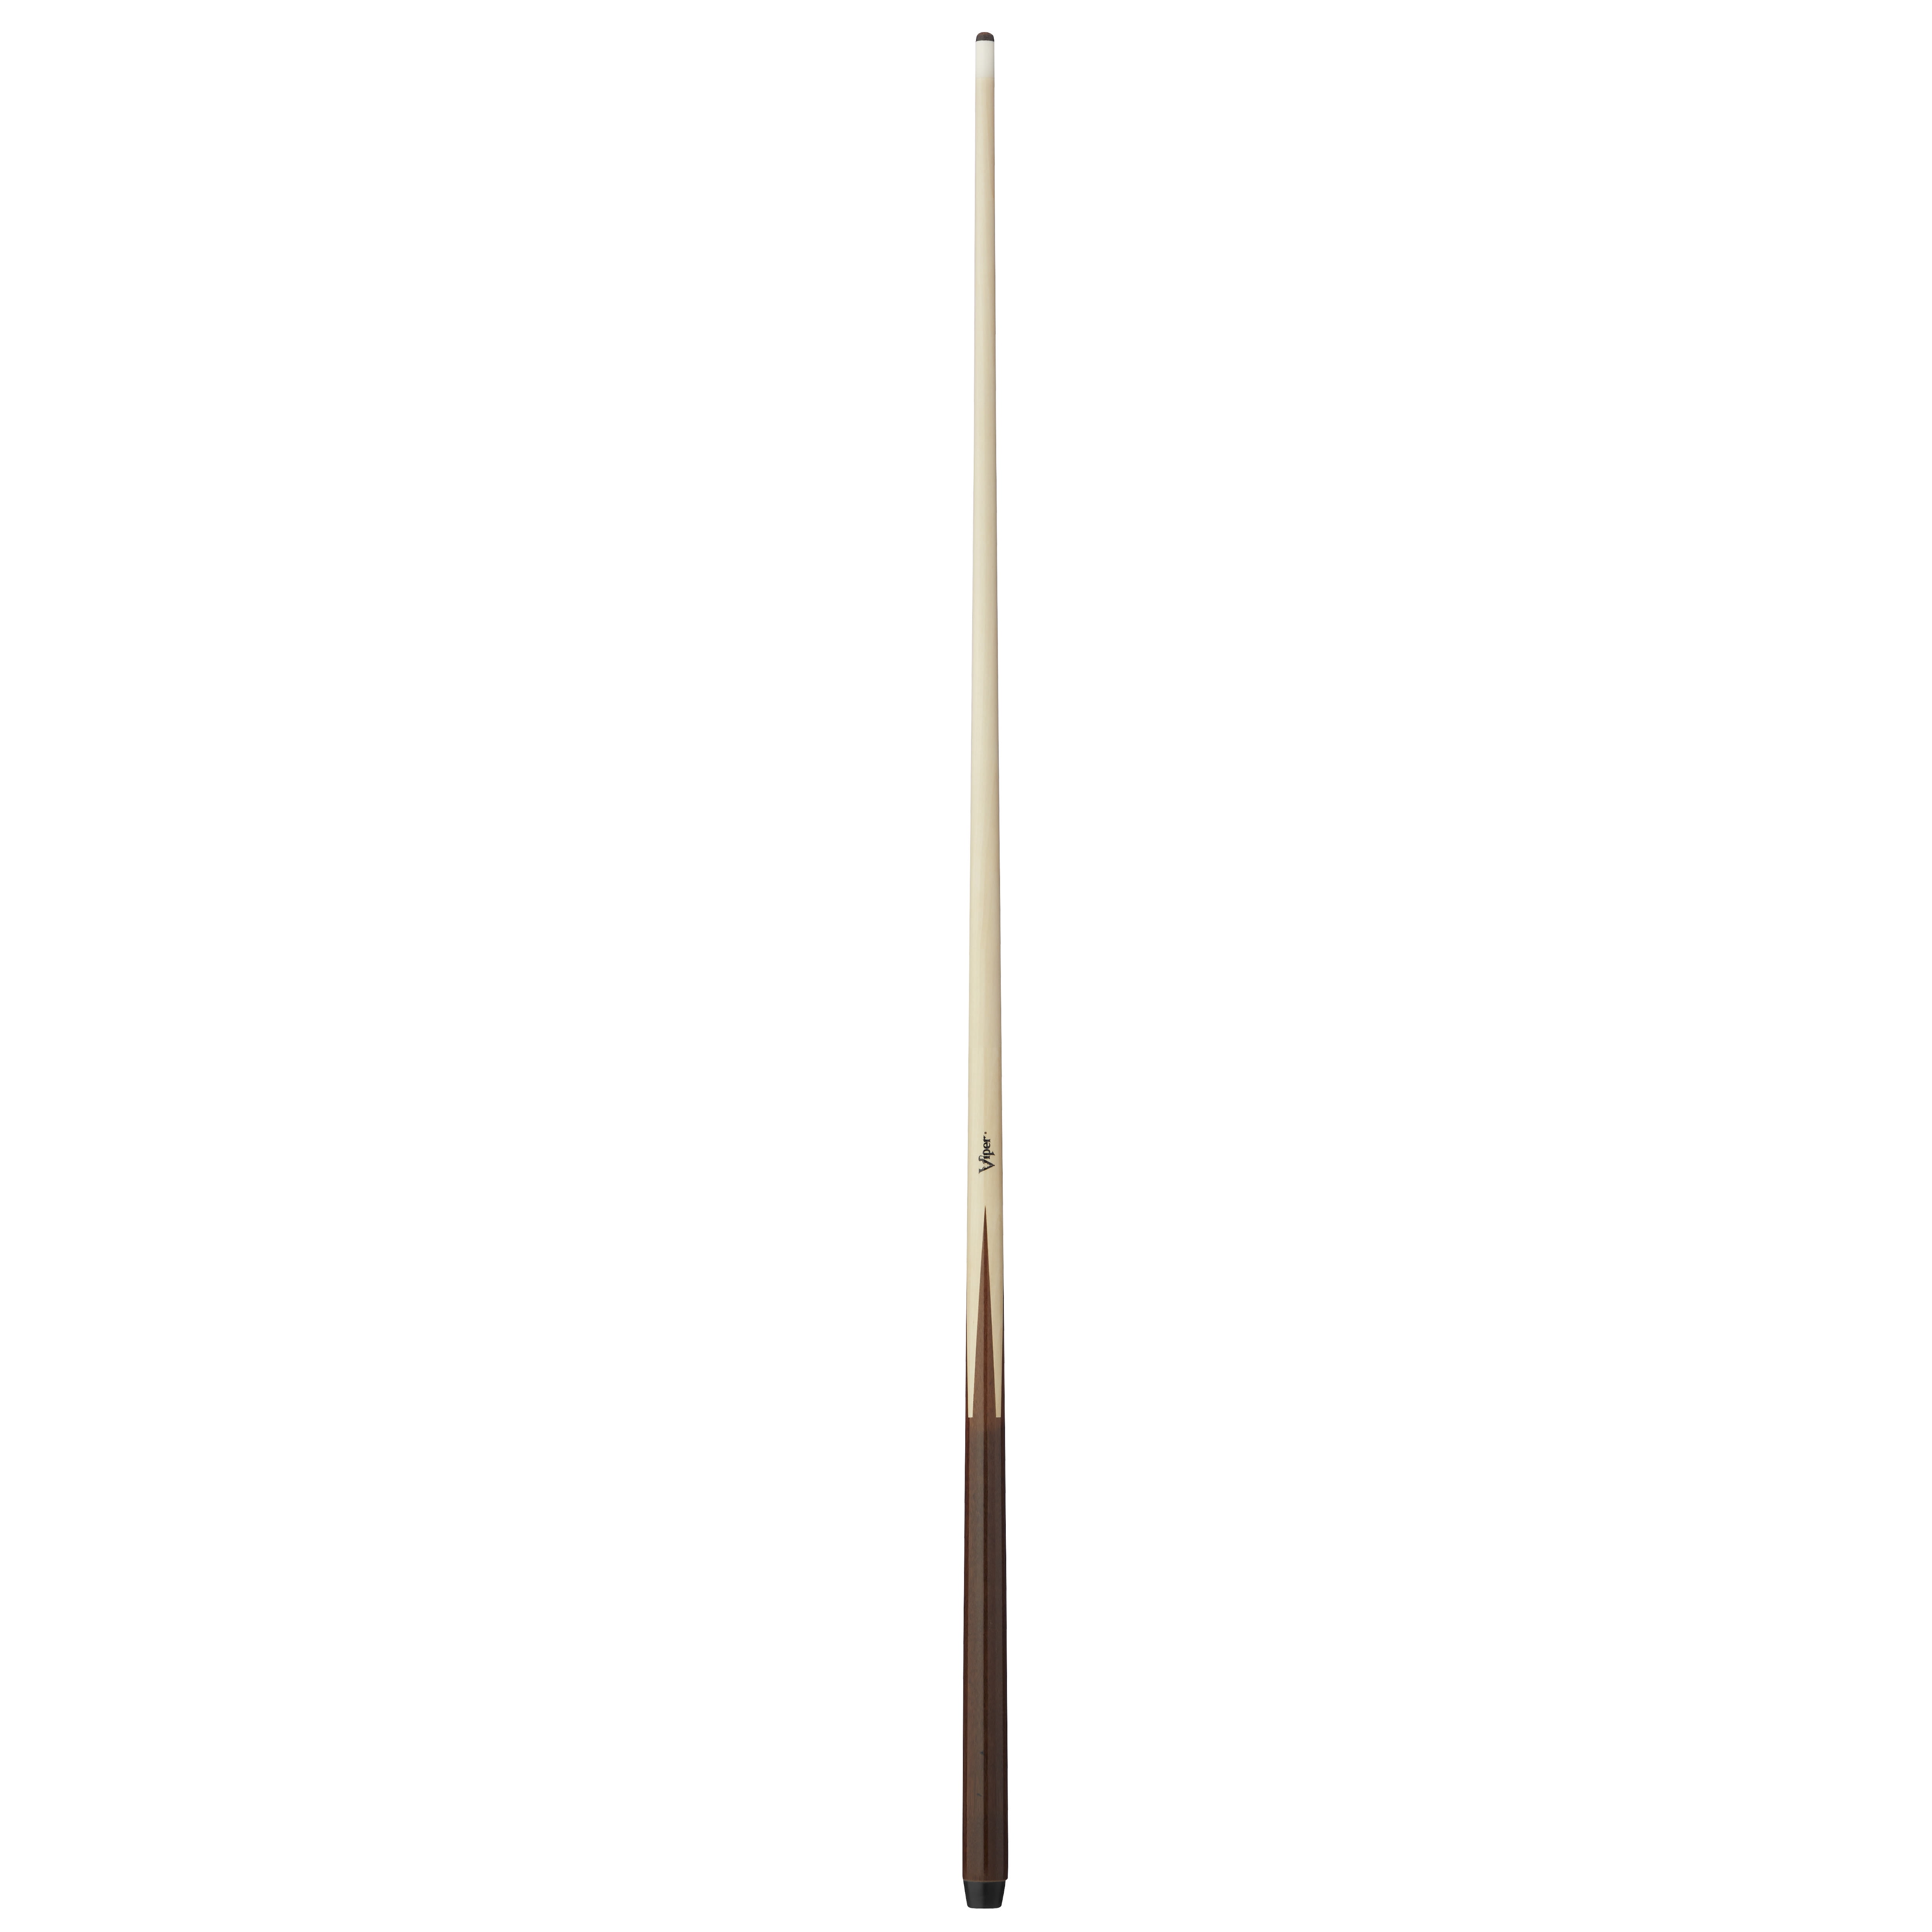 3 Brand New One Piece Pool Cues sticks Bar House Maple 4-Prong inlay 48" inch 